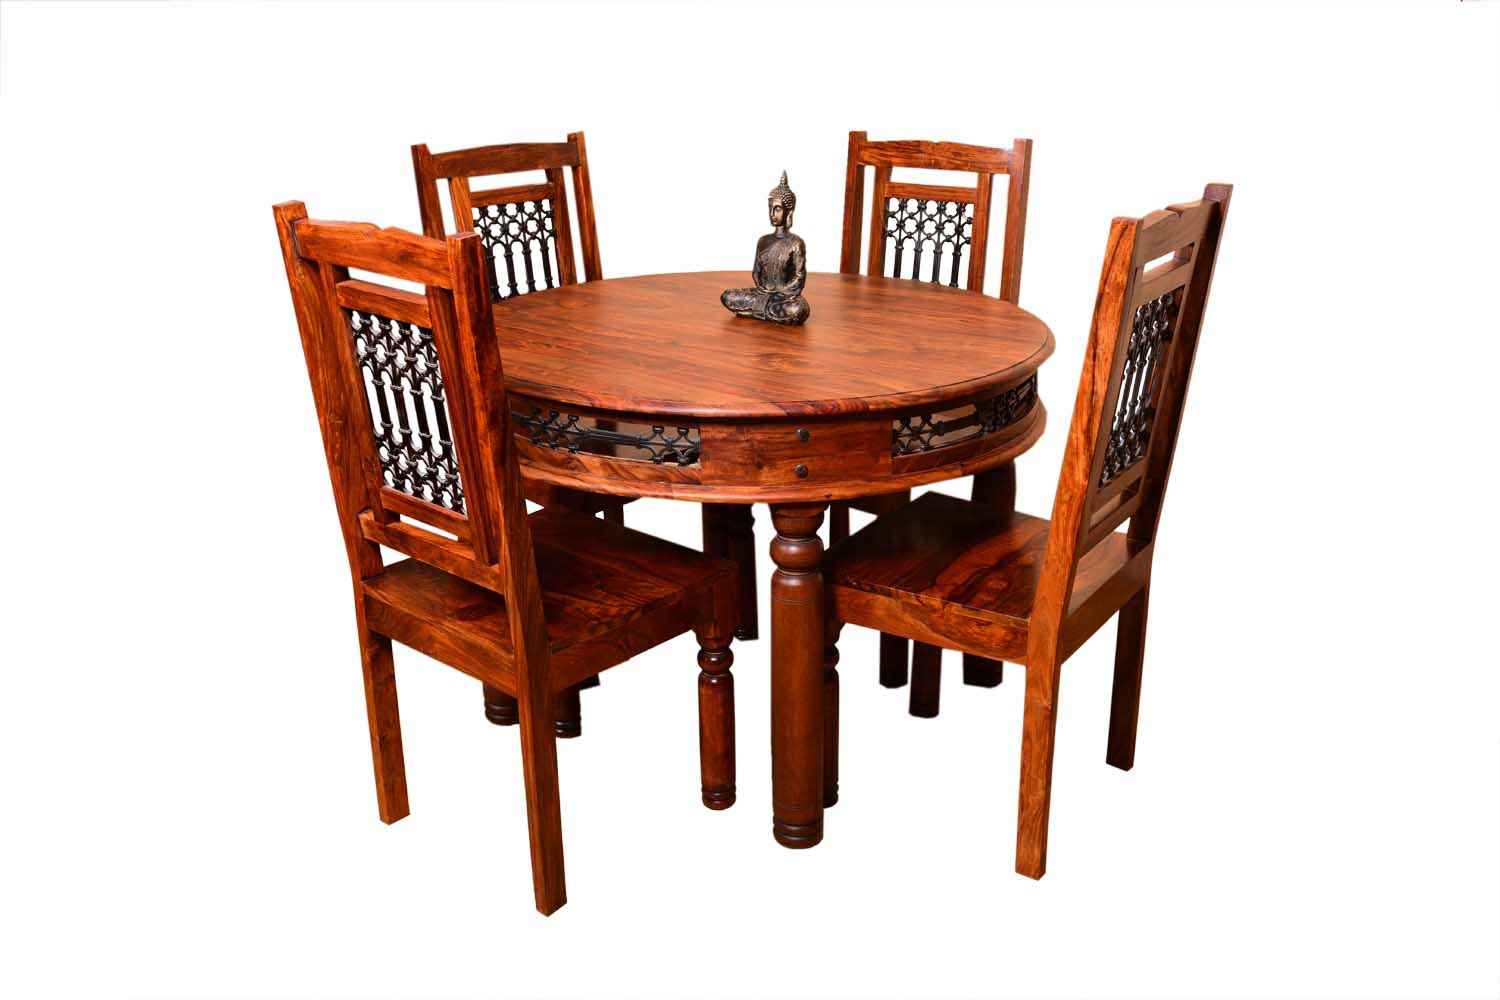 4 Seater Vintage Round Dining Table Set, Round Breakfast Table Set For 4